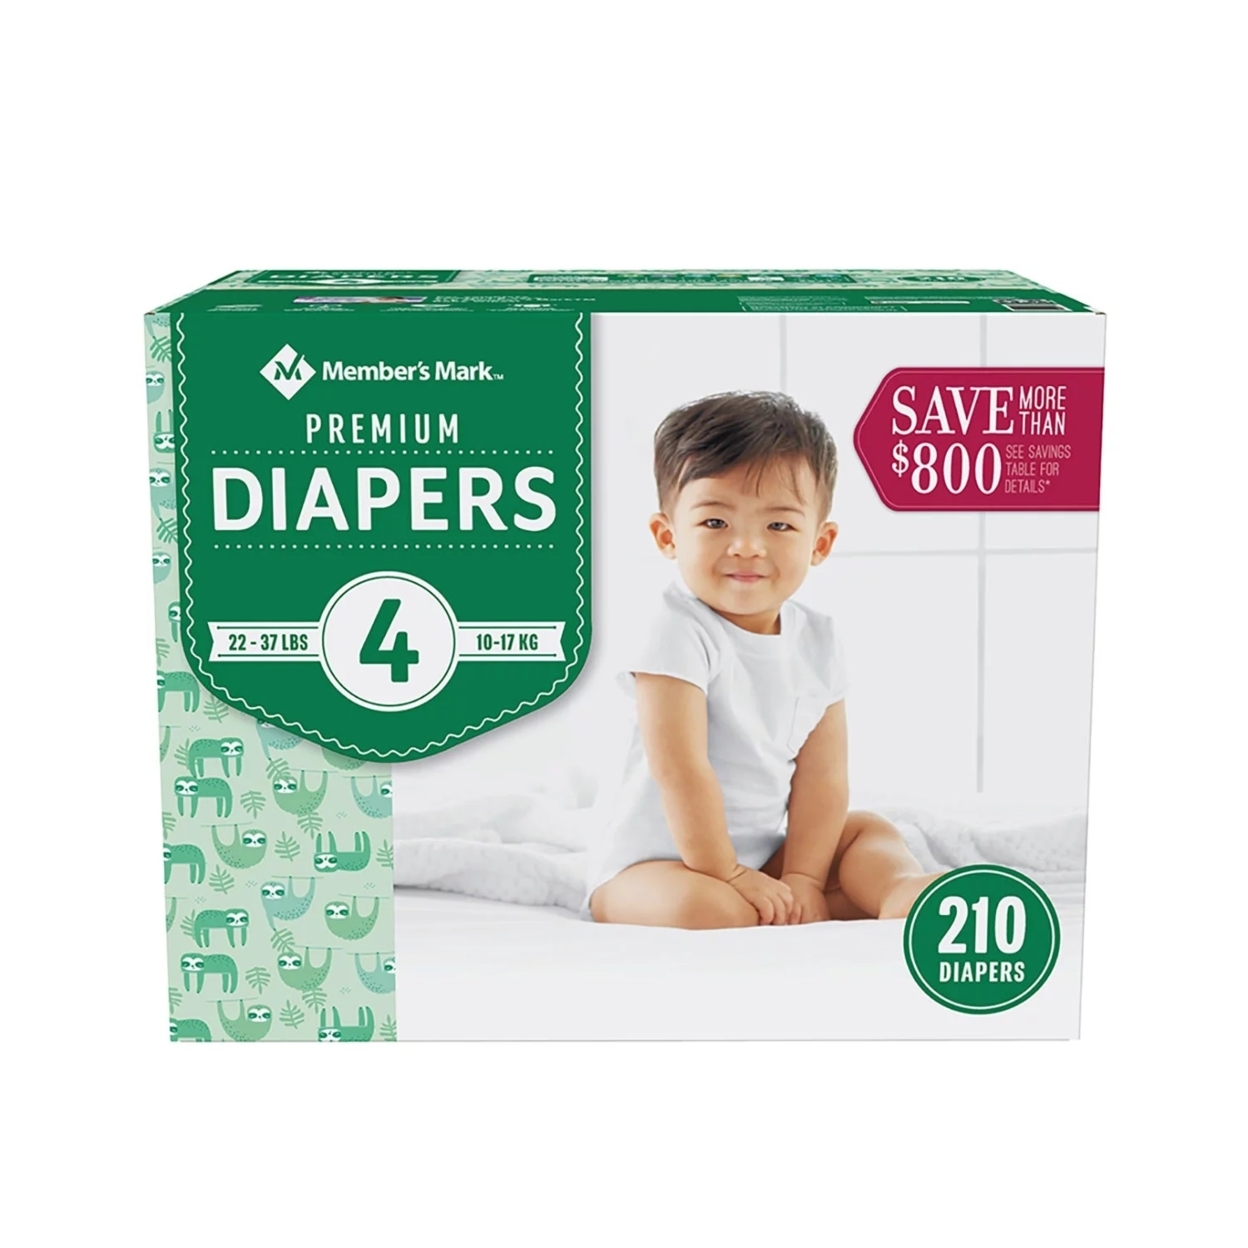 Member's Mark Premium Baby Diapers, Size 4 (22-37 Pounds), 210 Count